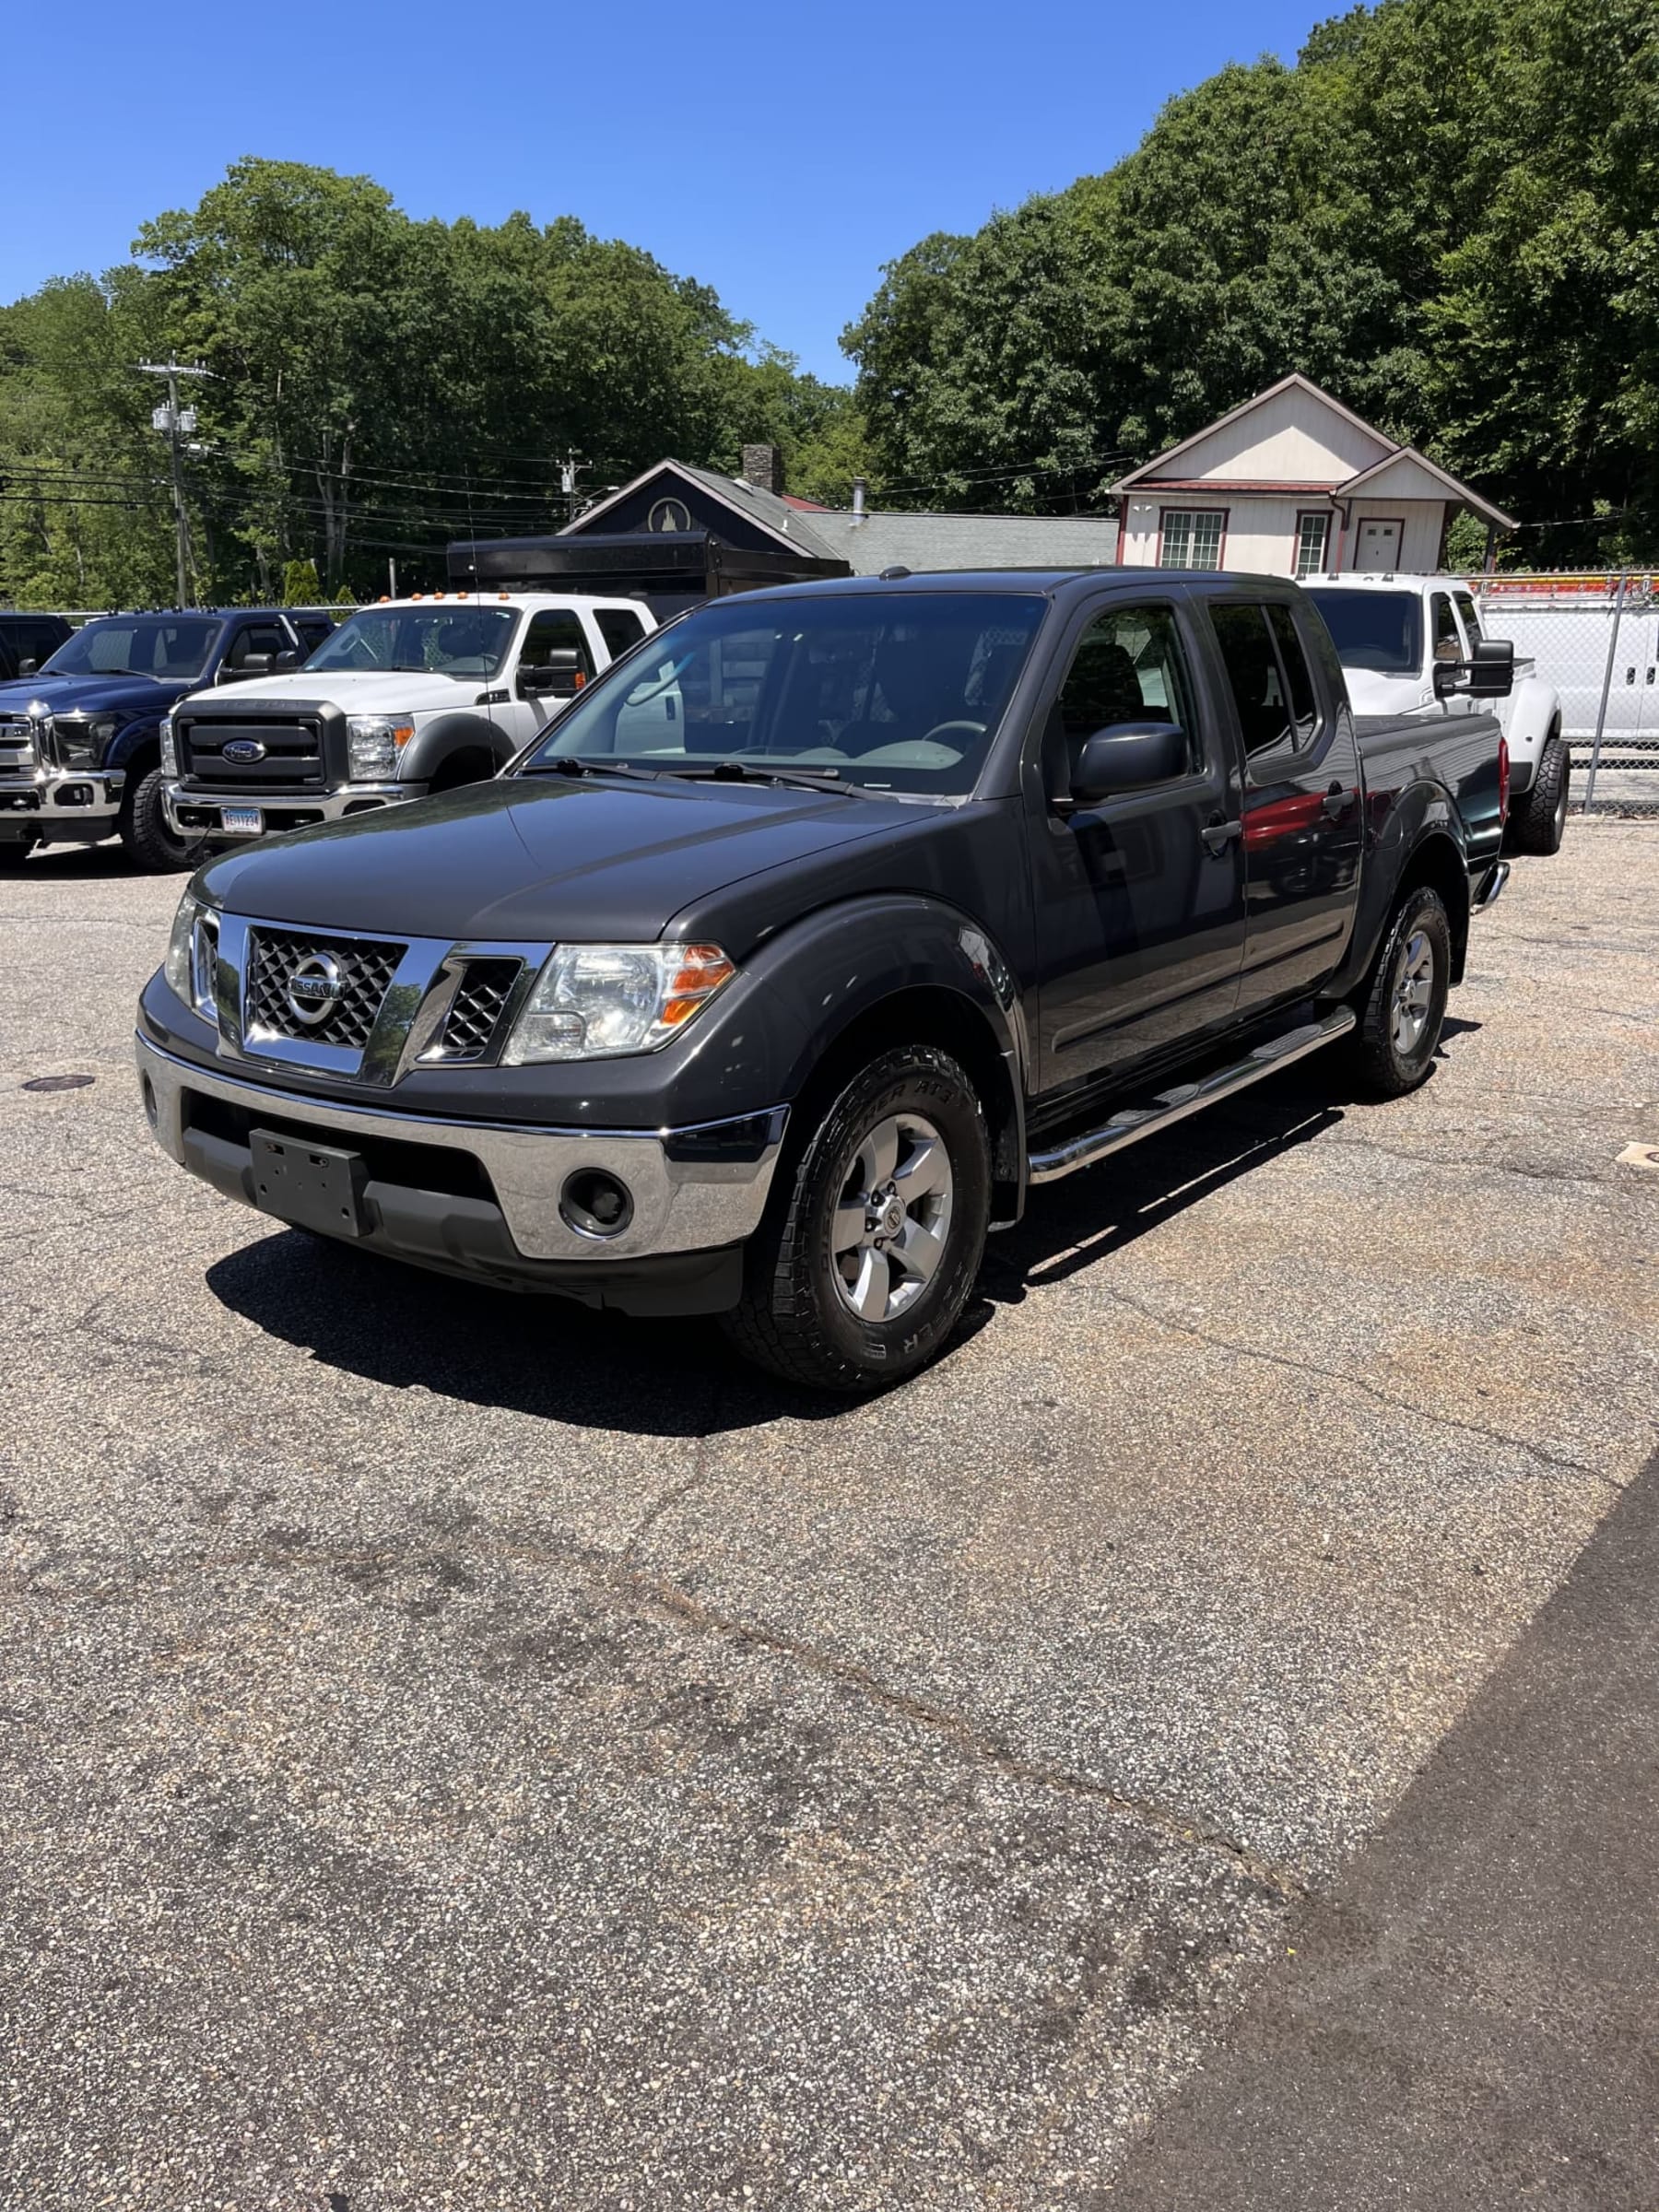 NEW ARRIVAL!! One owner! Clean carfax! Rust and rot free!! 4x4!! 2011 Nissan Frontier SV!! 4.0 V6! Hard Tonneau cover! Bed extender! Dealer serviced!! 158k miles!! Runs and drives like new!! Won’t last at ONLY $11,900!